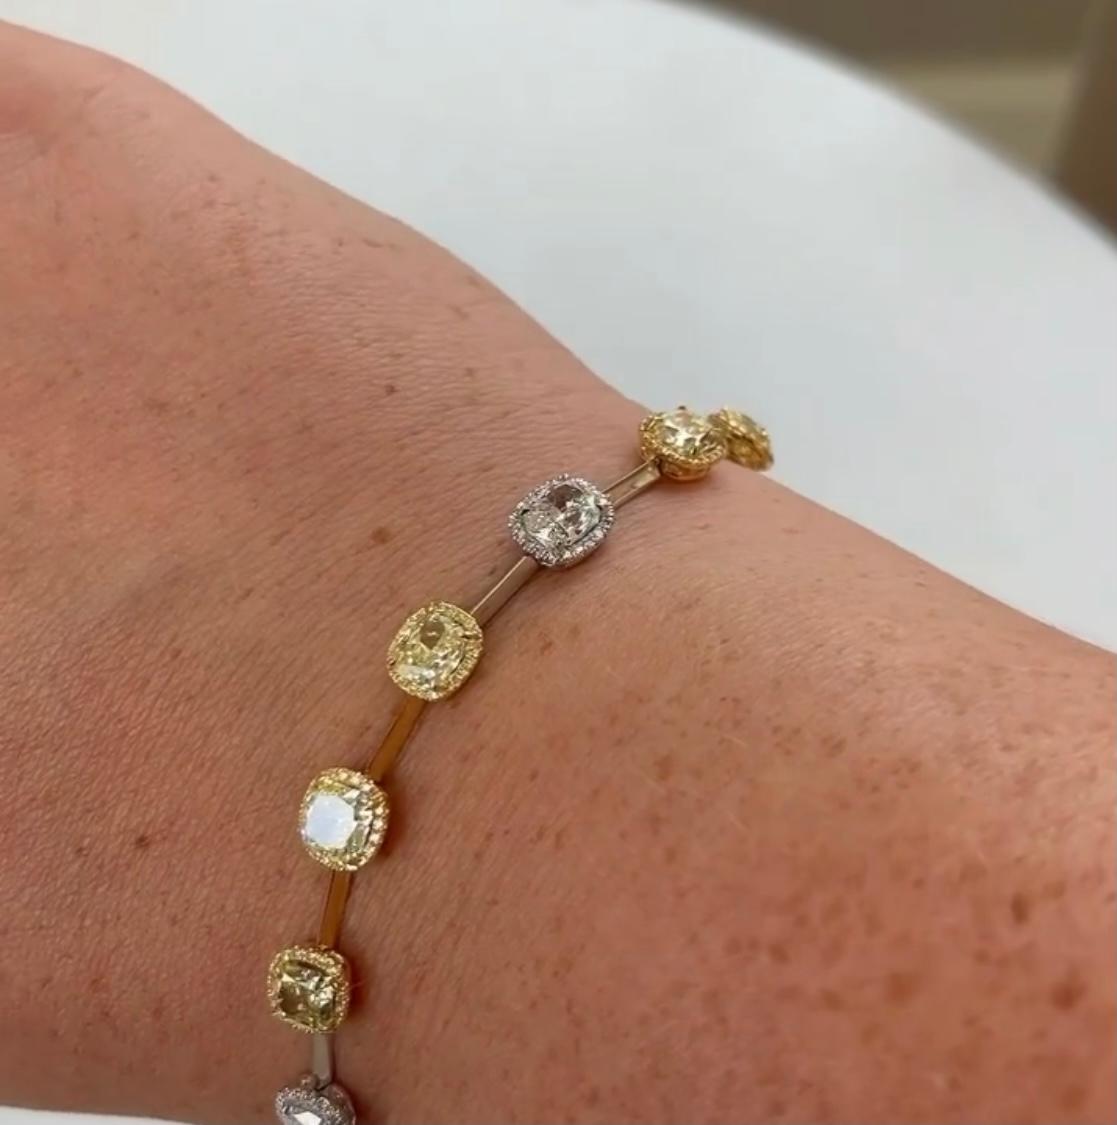 Abstract and Sophisticated Yellow and White Diamond Bracelet.

9 Yellow Diamonds weighing 6.30 Carats
3 White Diamonds weighing 2.10 Carats

Round Diamond of White and Yellow totaling 1.11 Carats